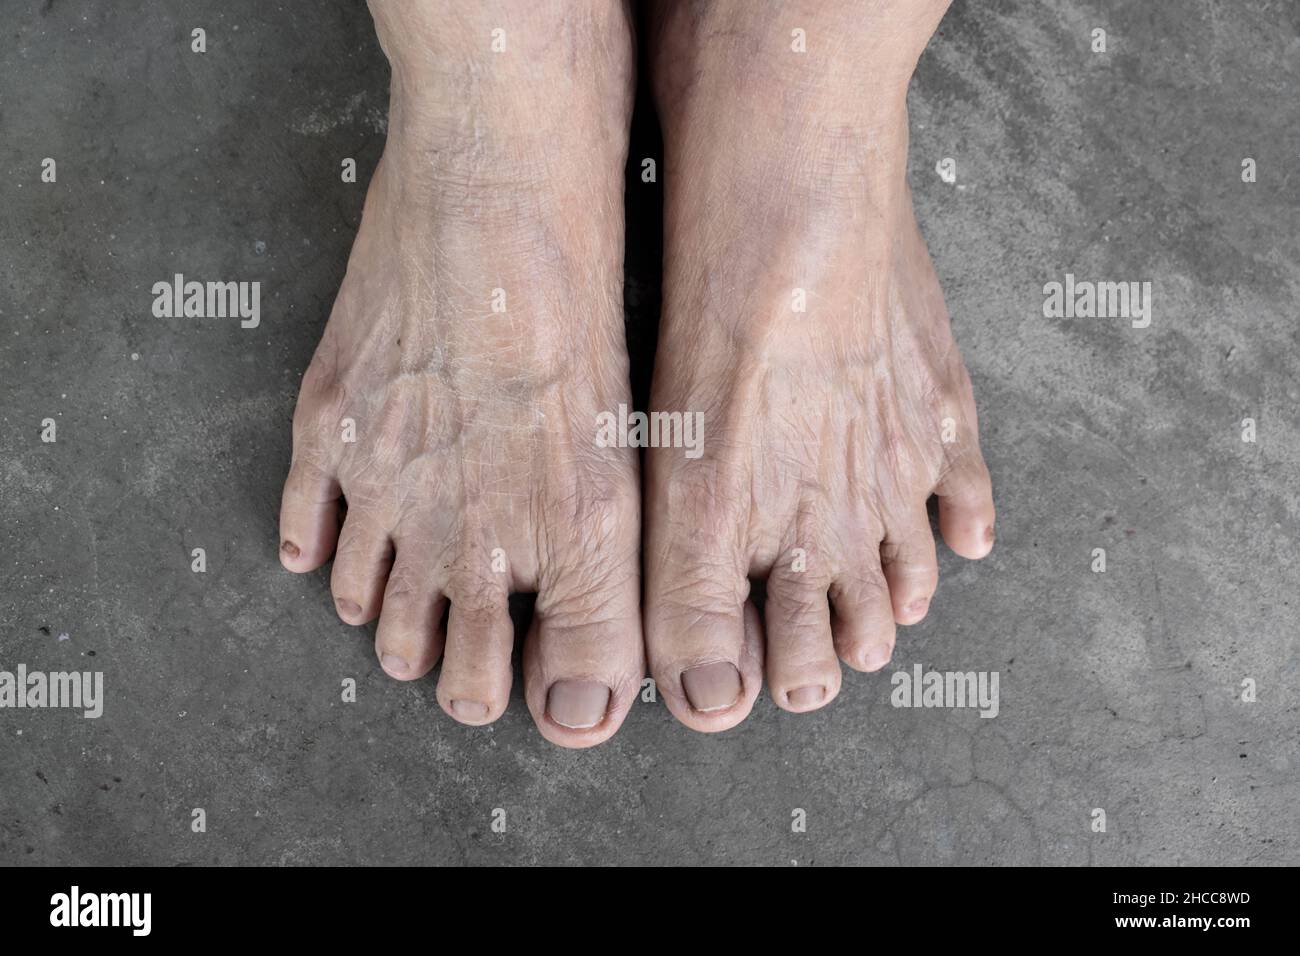 Feet of Asian elder woman. Concept of foot and toes health, and thin skin. Isolated on concrete background. Stock Photo